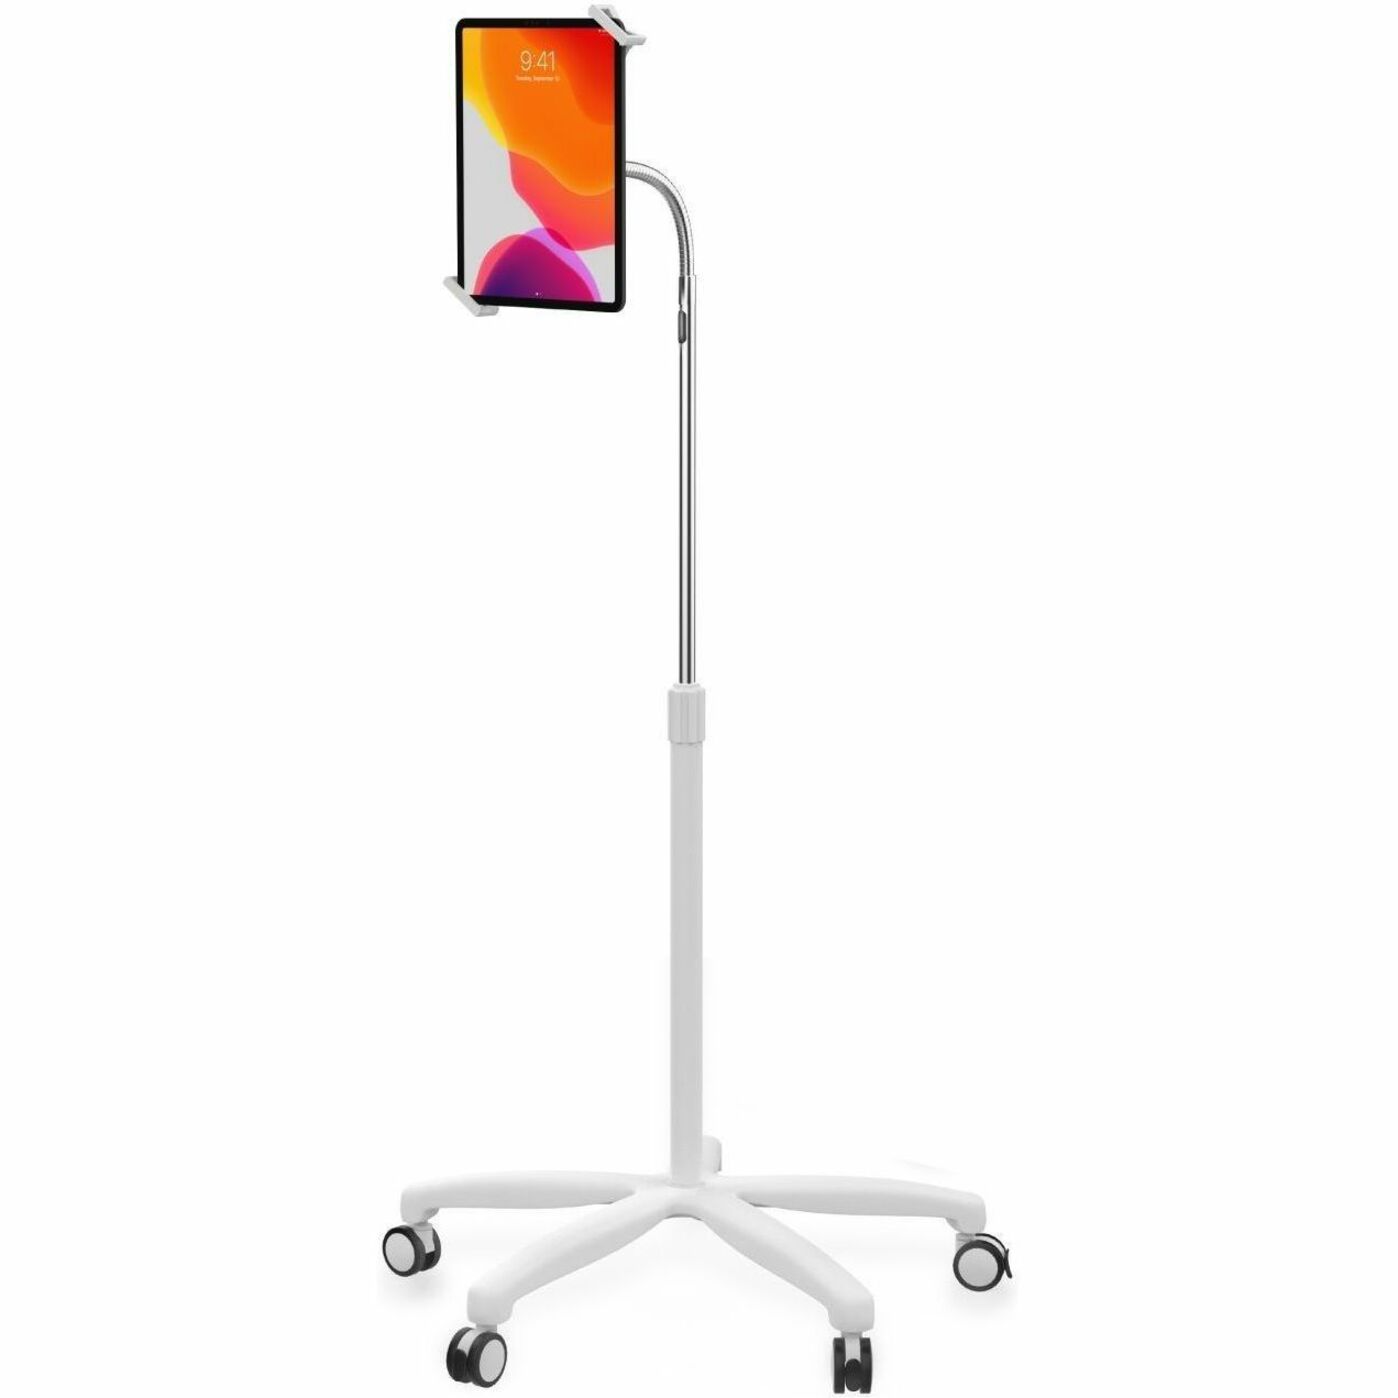 CTA Digital PAD-SHFSW Heavy-Duty Medical Mobile Floor Stand for 7-13 Inch Tablets, Flexible, Cable Management, Tilt, Mobility, Anti-theft, Lockable